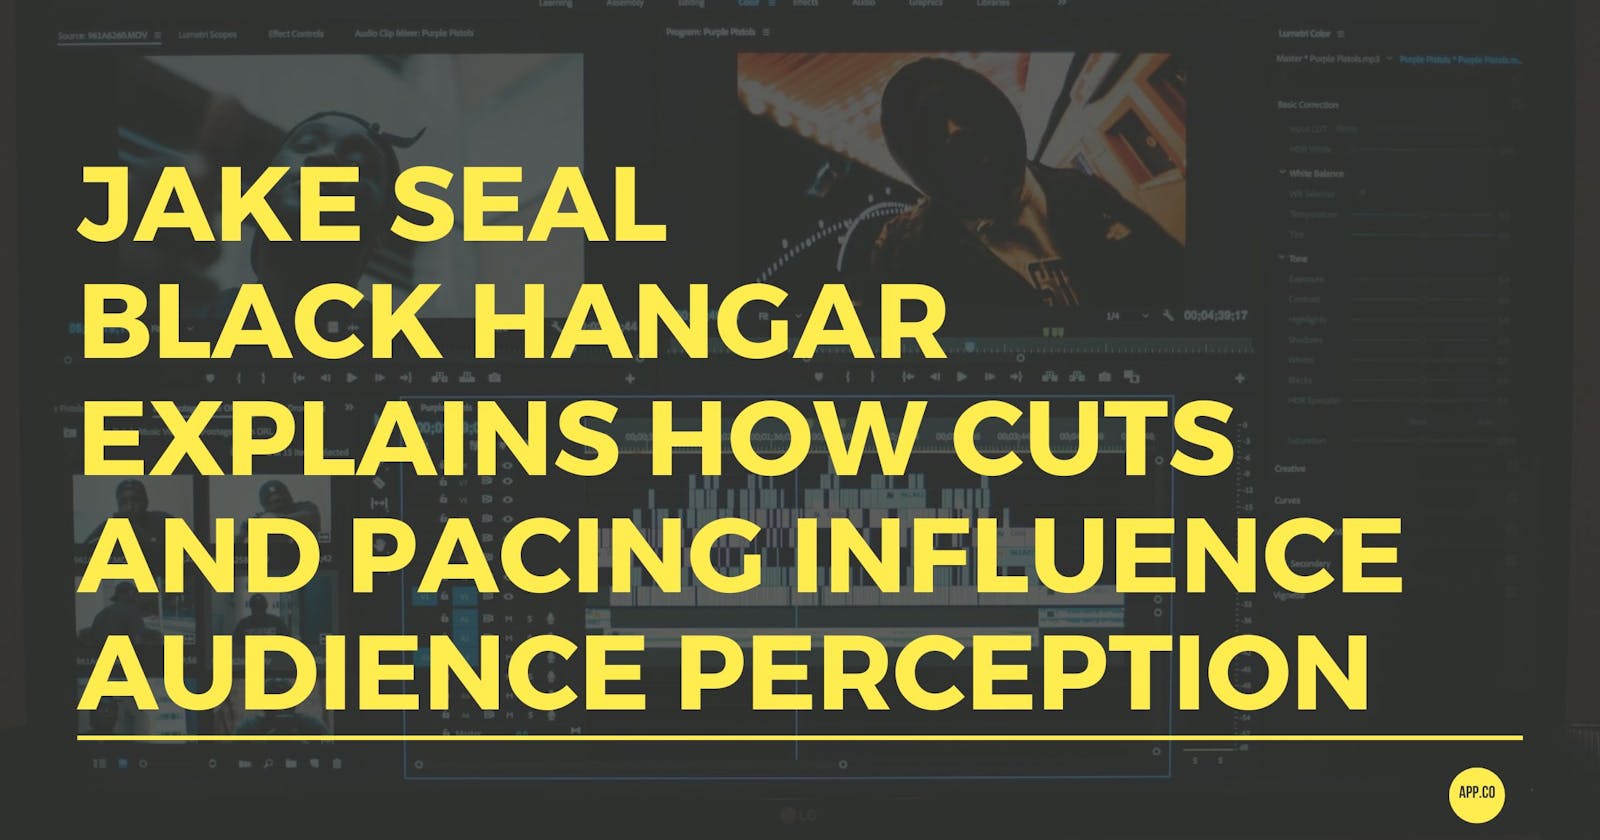 Jake Seal Black Hangar Explains How Cuts and Pacing Influence Audience Perception